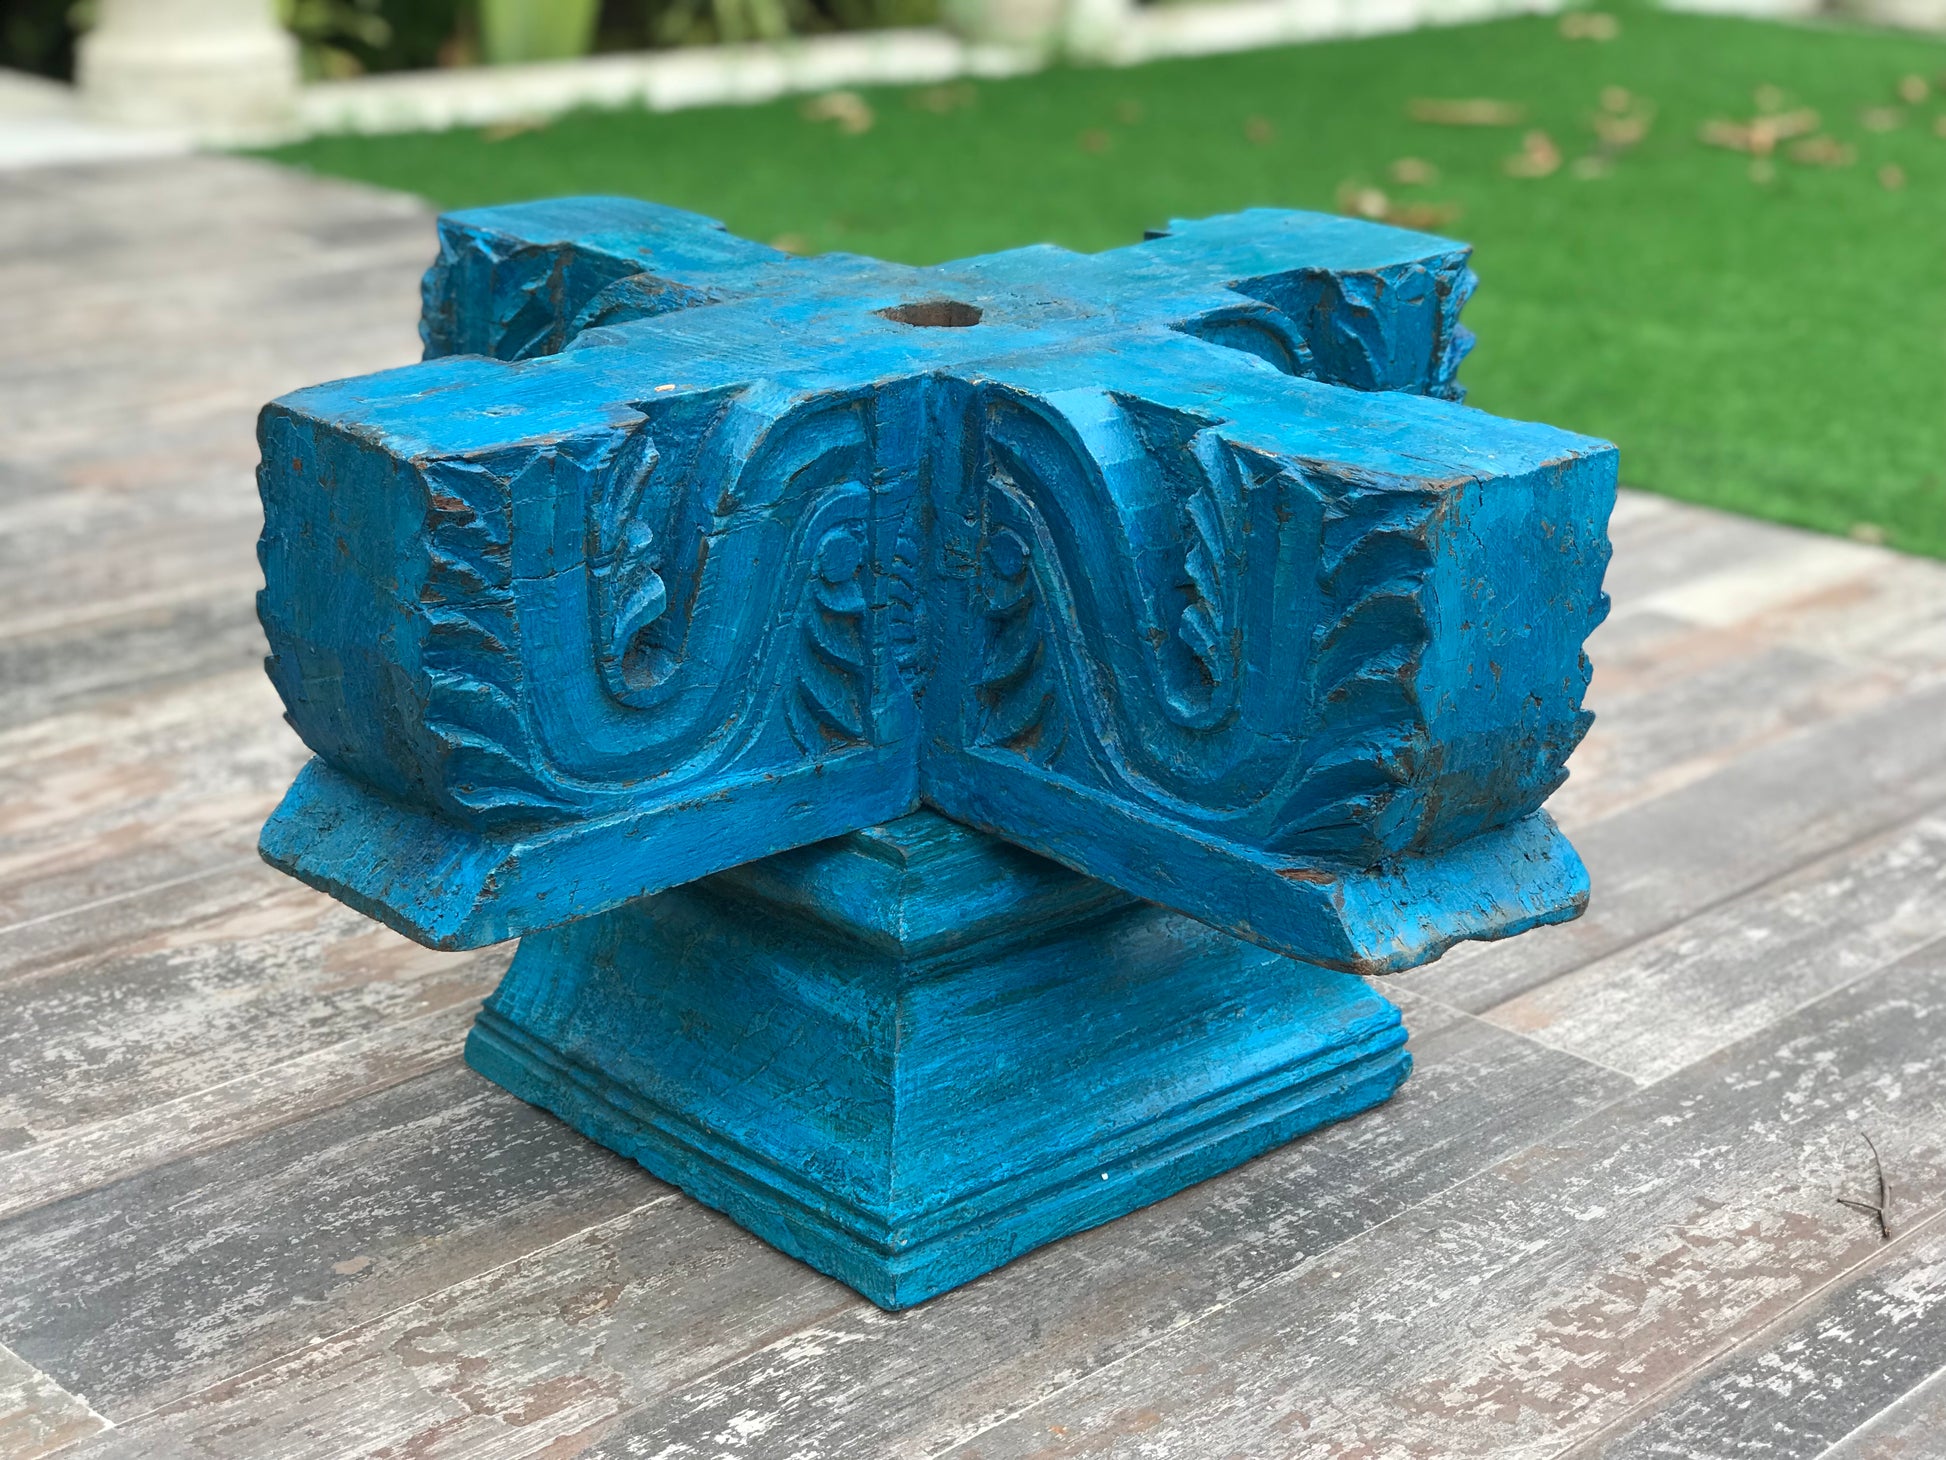 Elegant and Traditional Wooden Carved Blue Bracket Coffee Table.  The Source India is an Indian Handicraft, Home Decor, Furnishing and Textiles Store. Based out of Hauz Khas Village New Delhi, each piece is carefully procured to allow the enhancement of India's Culture.